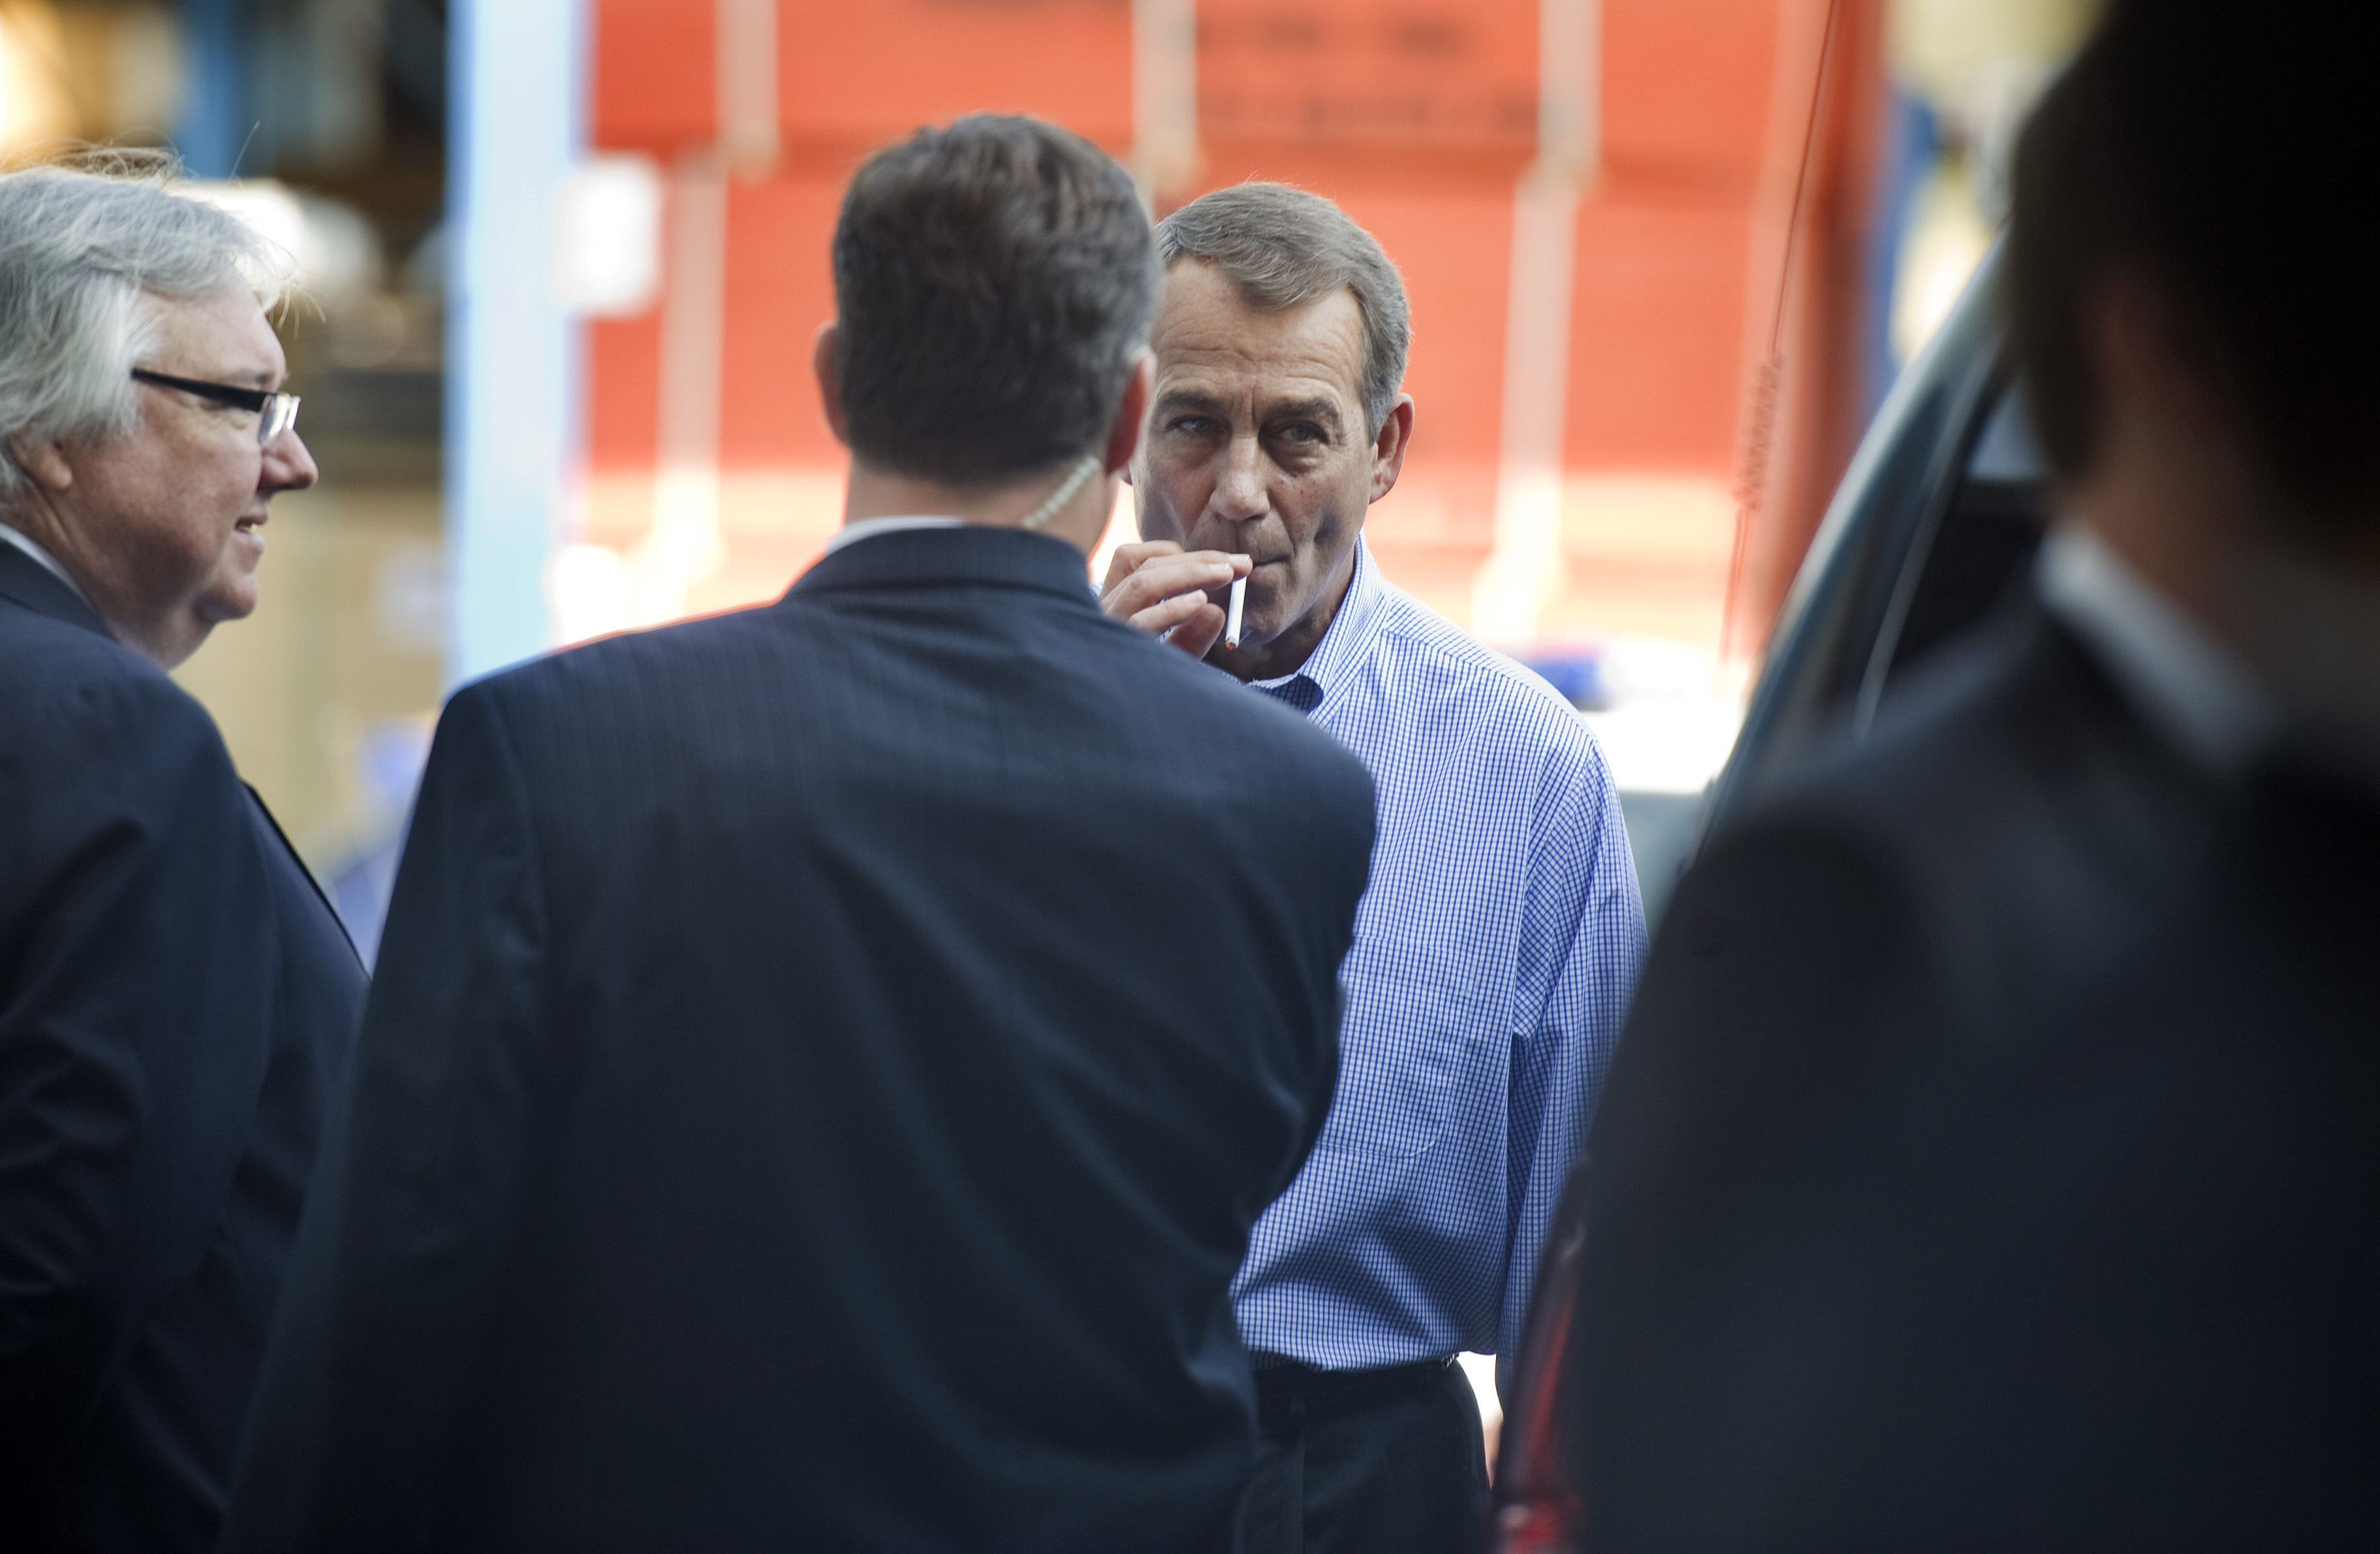 UNITED STATES - SEPTEMBER 23:  House Minority Leader John Boehner, R-Ohio, smokes a cigarette after a news conference outside of Tart Lumber Company in Sterling, Va., were they unveiled "A Pledge to America," a governing agenda devised by House Republicans for the 111th Congress.  (Photo By Tom Williams/Roll Call via Getty Images) (CQ Roll Call via AP Images)